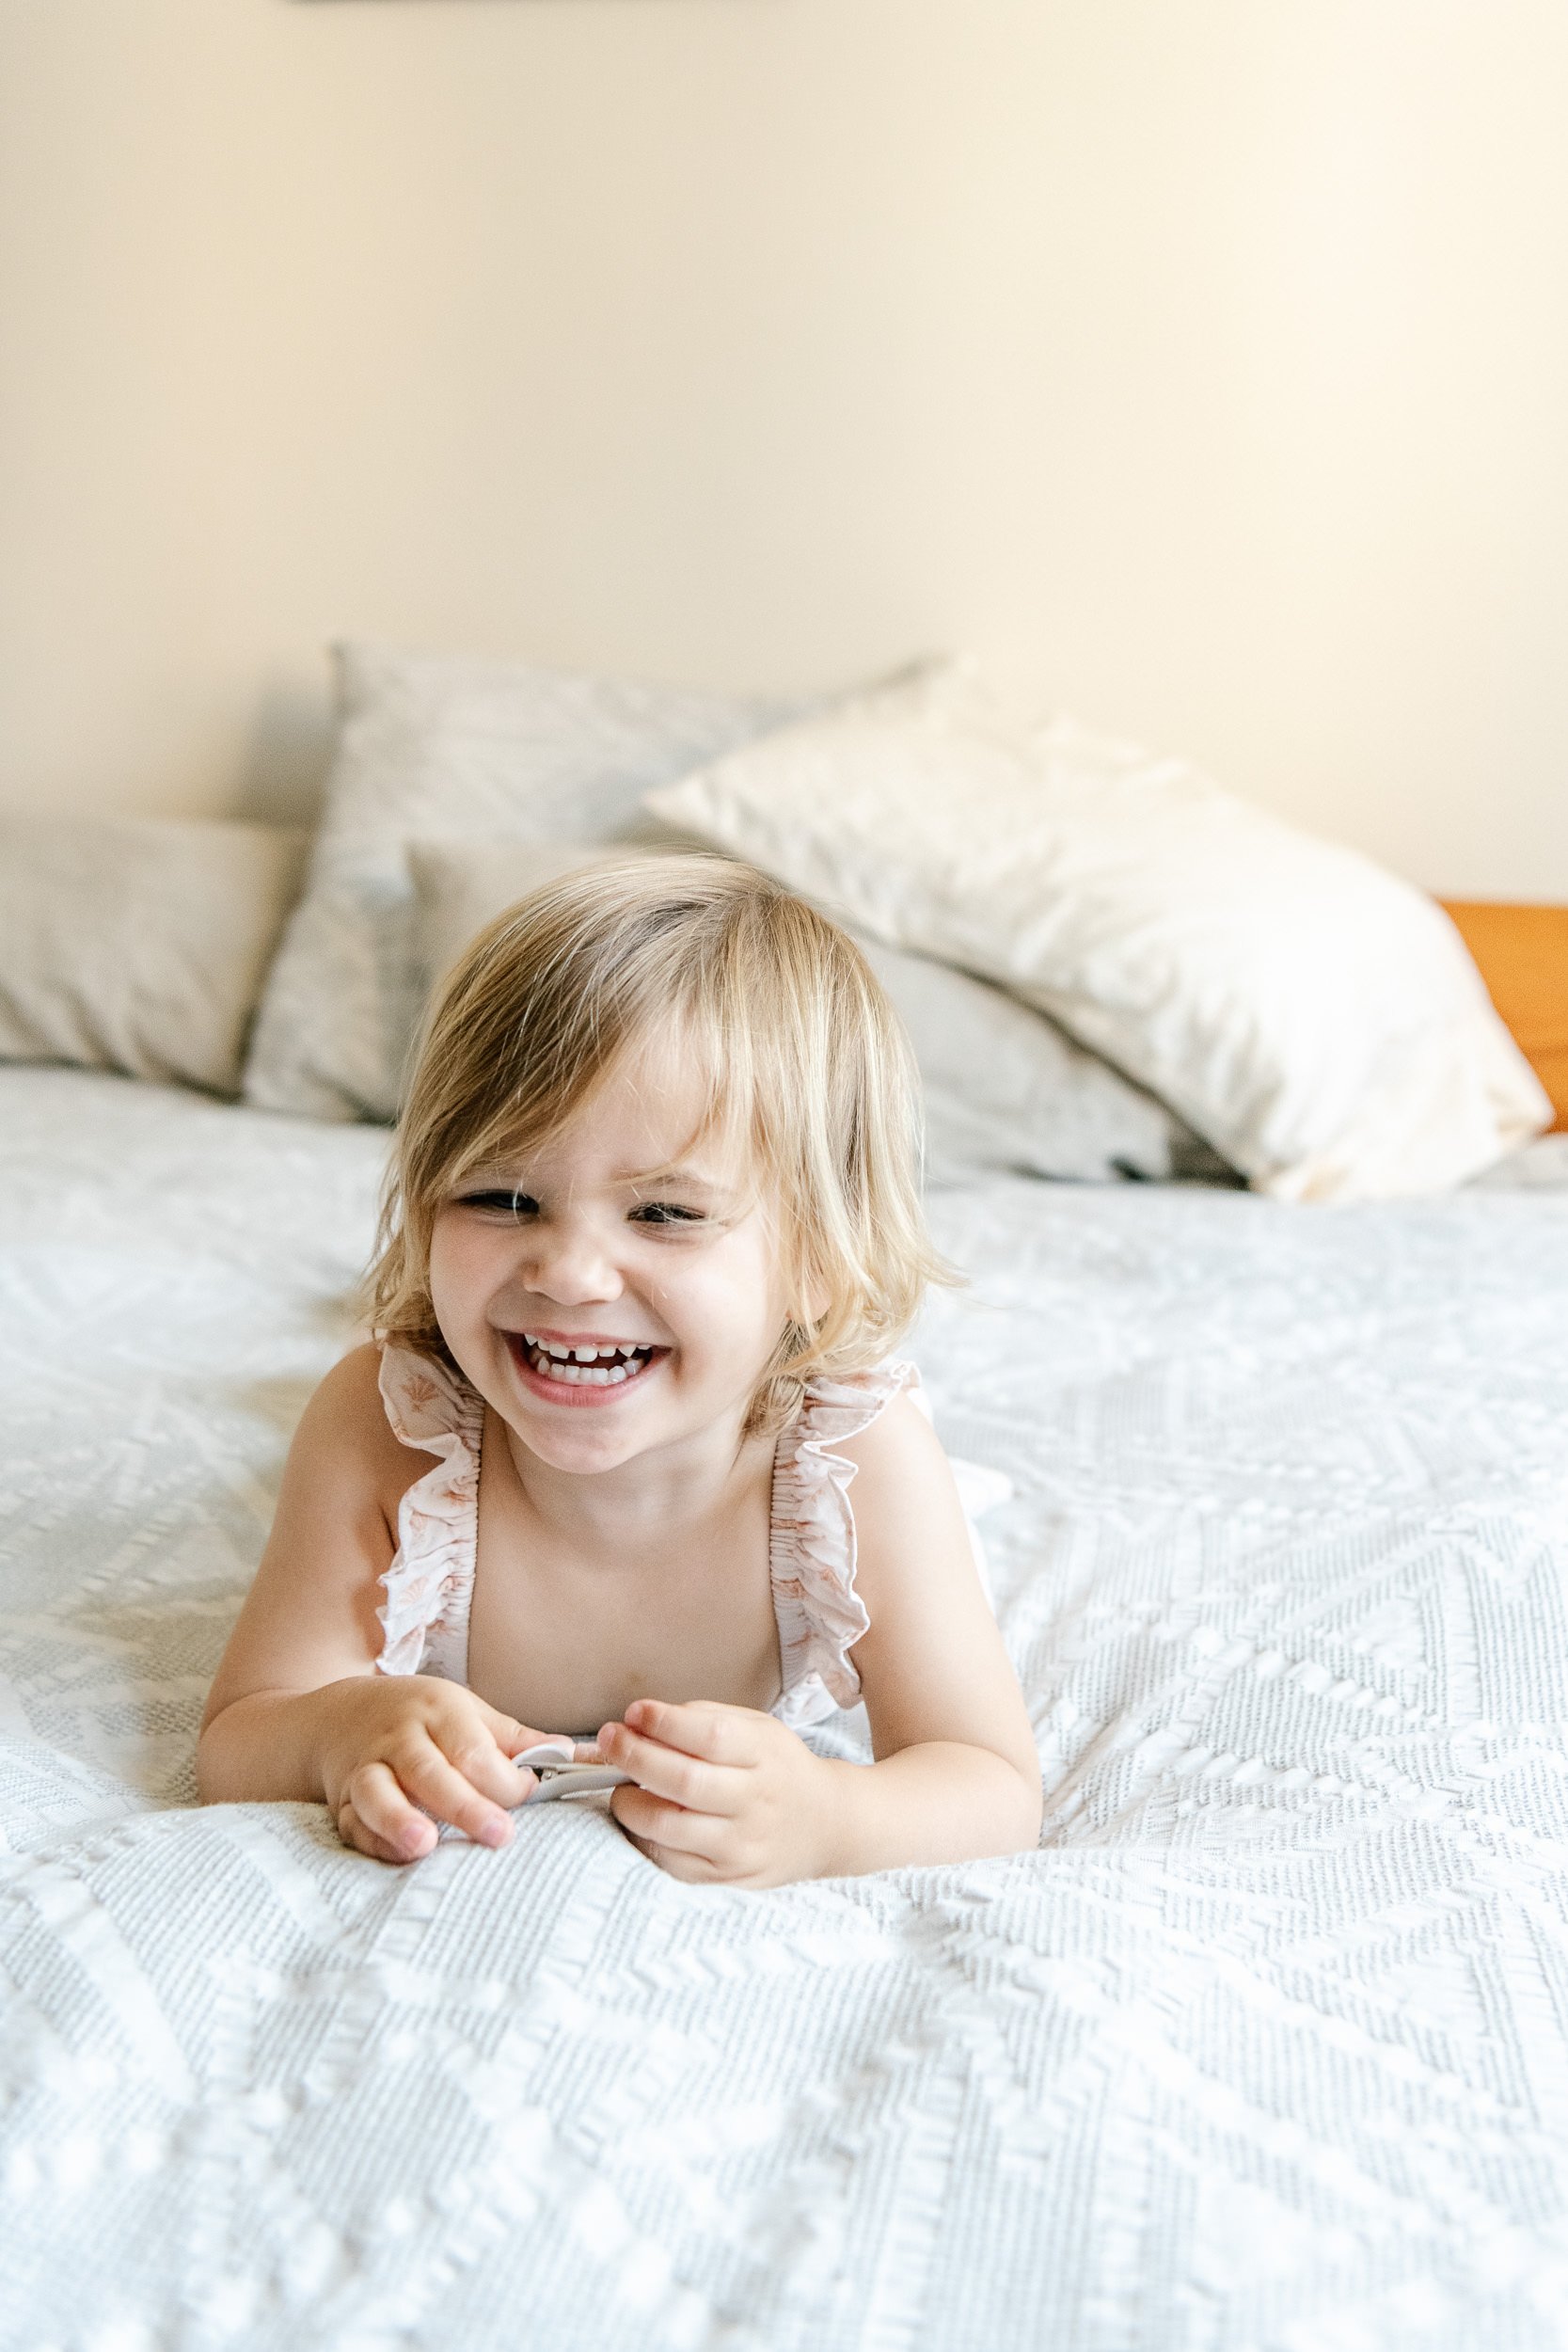  A little girl lays on her bed and laughs captured by Nicole Hawkins Photography. children portraits professional #NicoleHawkinsPhotograaphy #NicoleHawkinsChildren #NewYorkPortraits #KidsinNewYork #ChildrensPortraits #lifestyleportraits 